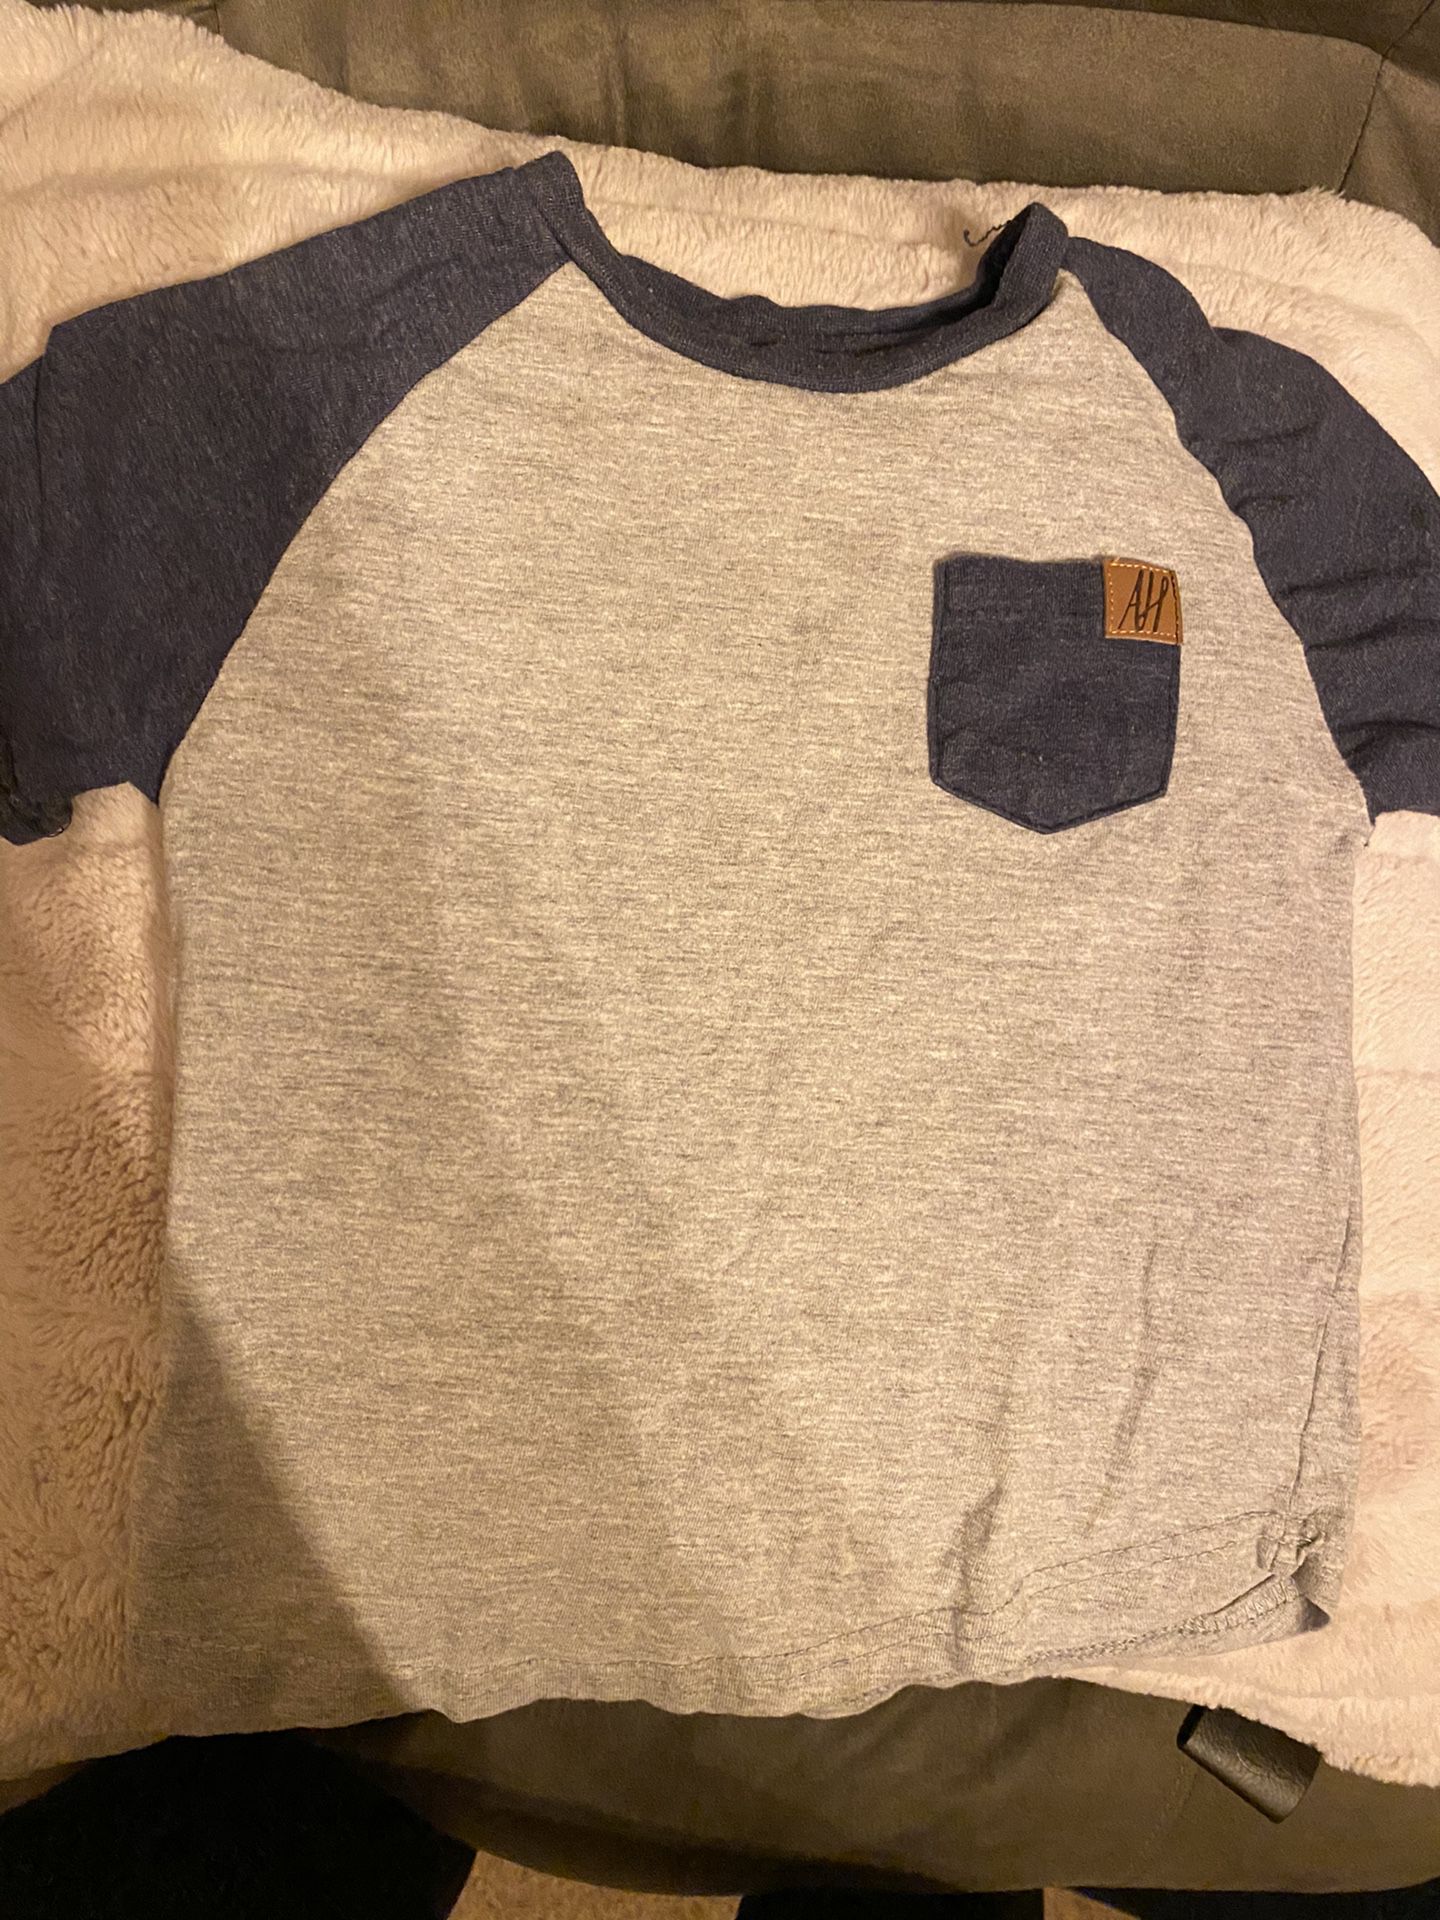 Boys Toddler shirts 2 for $5